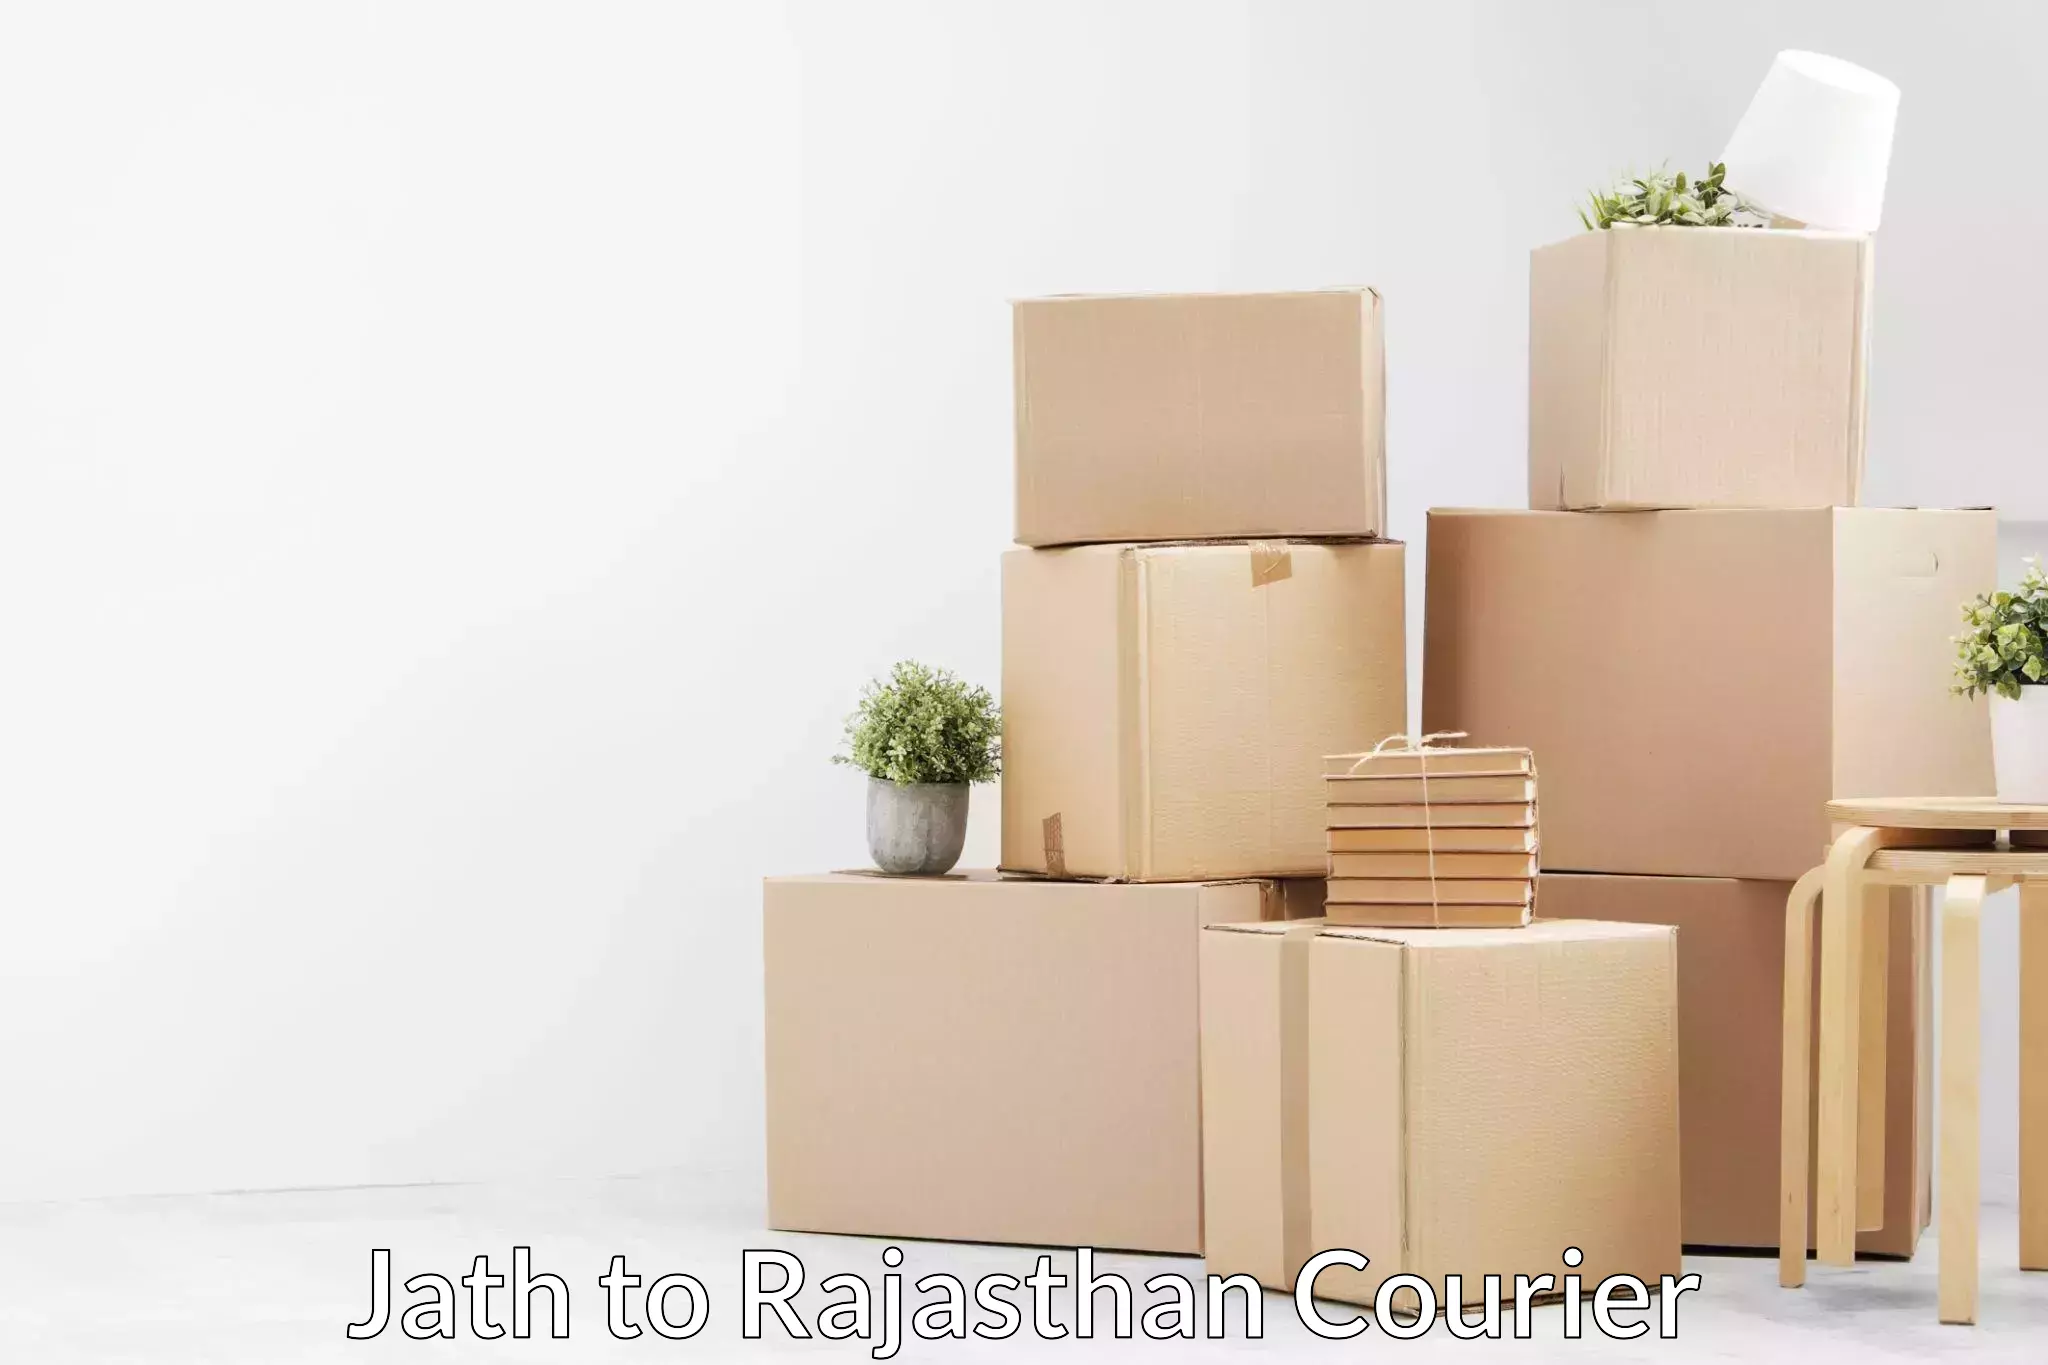 Professional moving company Jath to Rajasthan